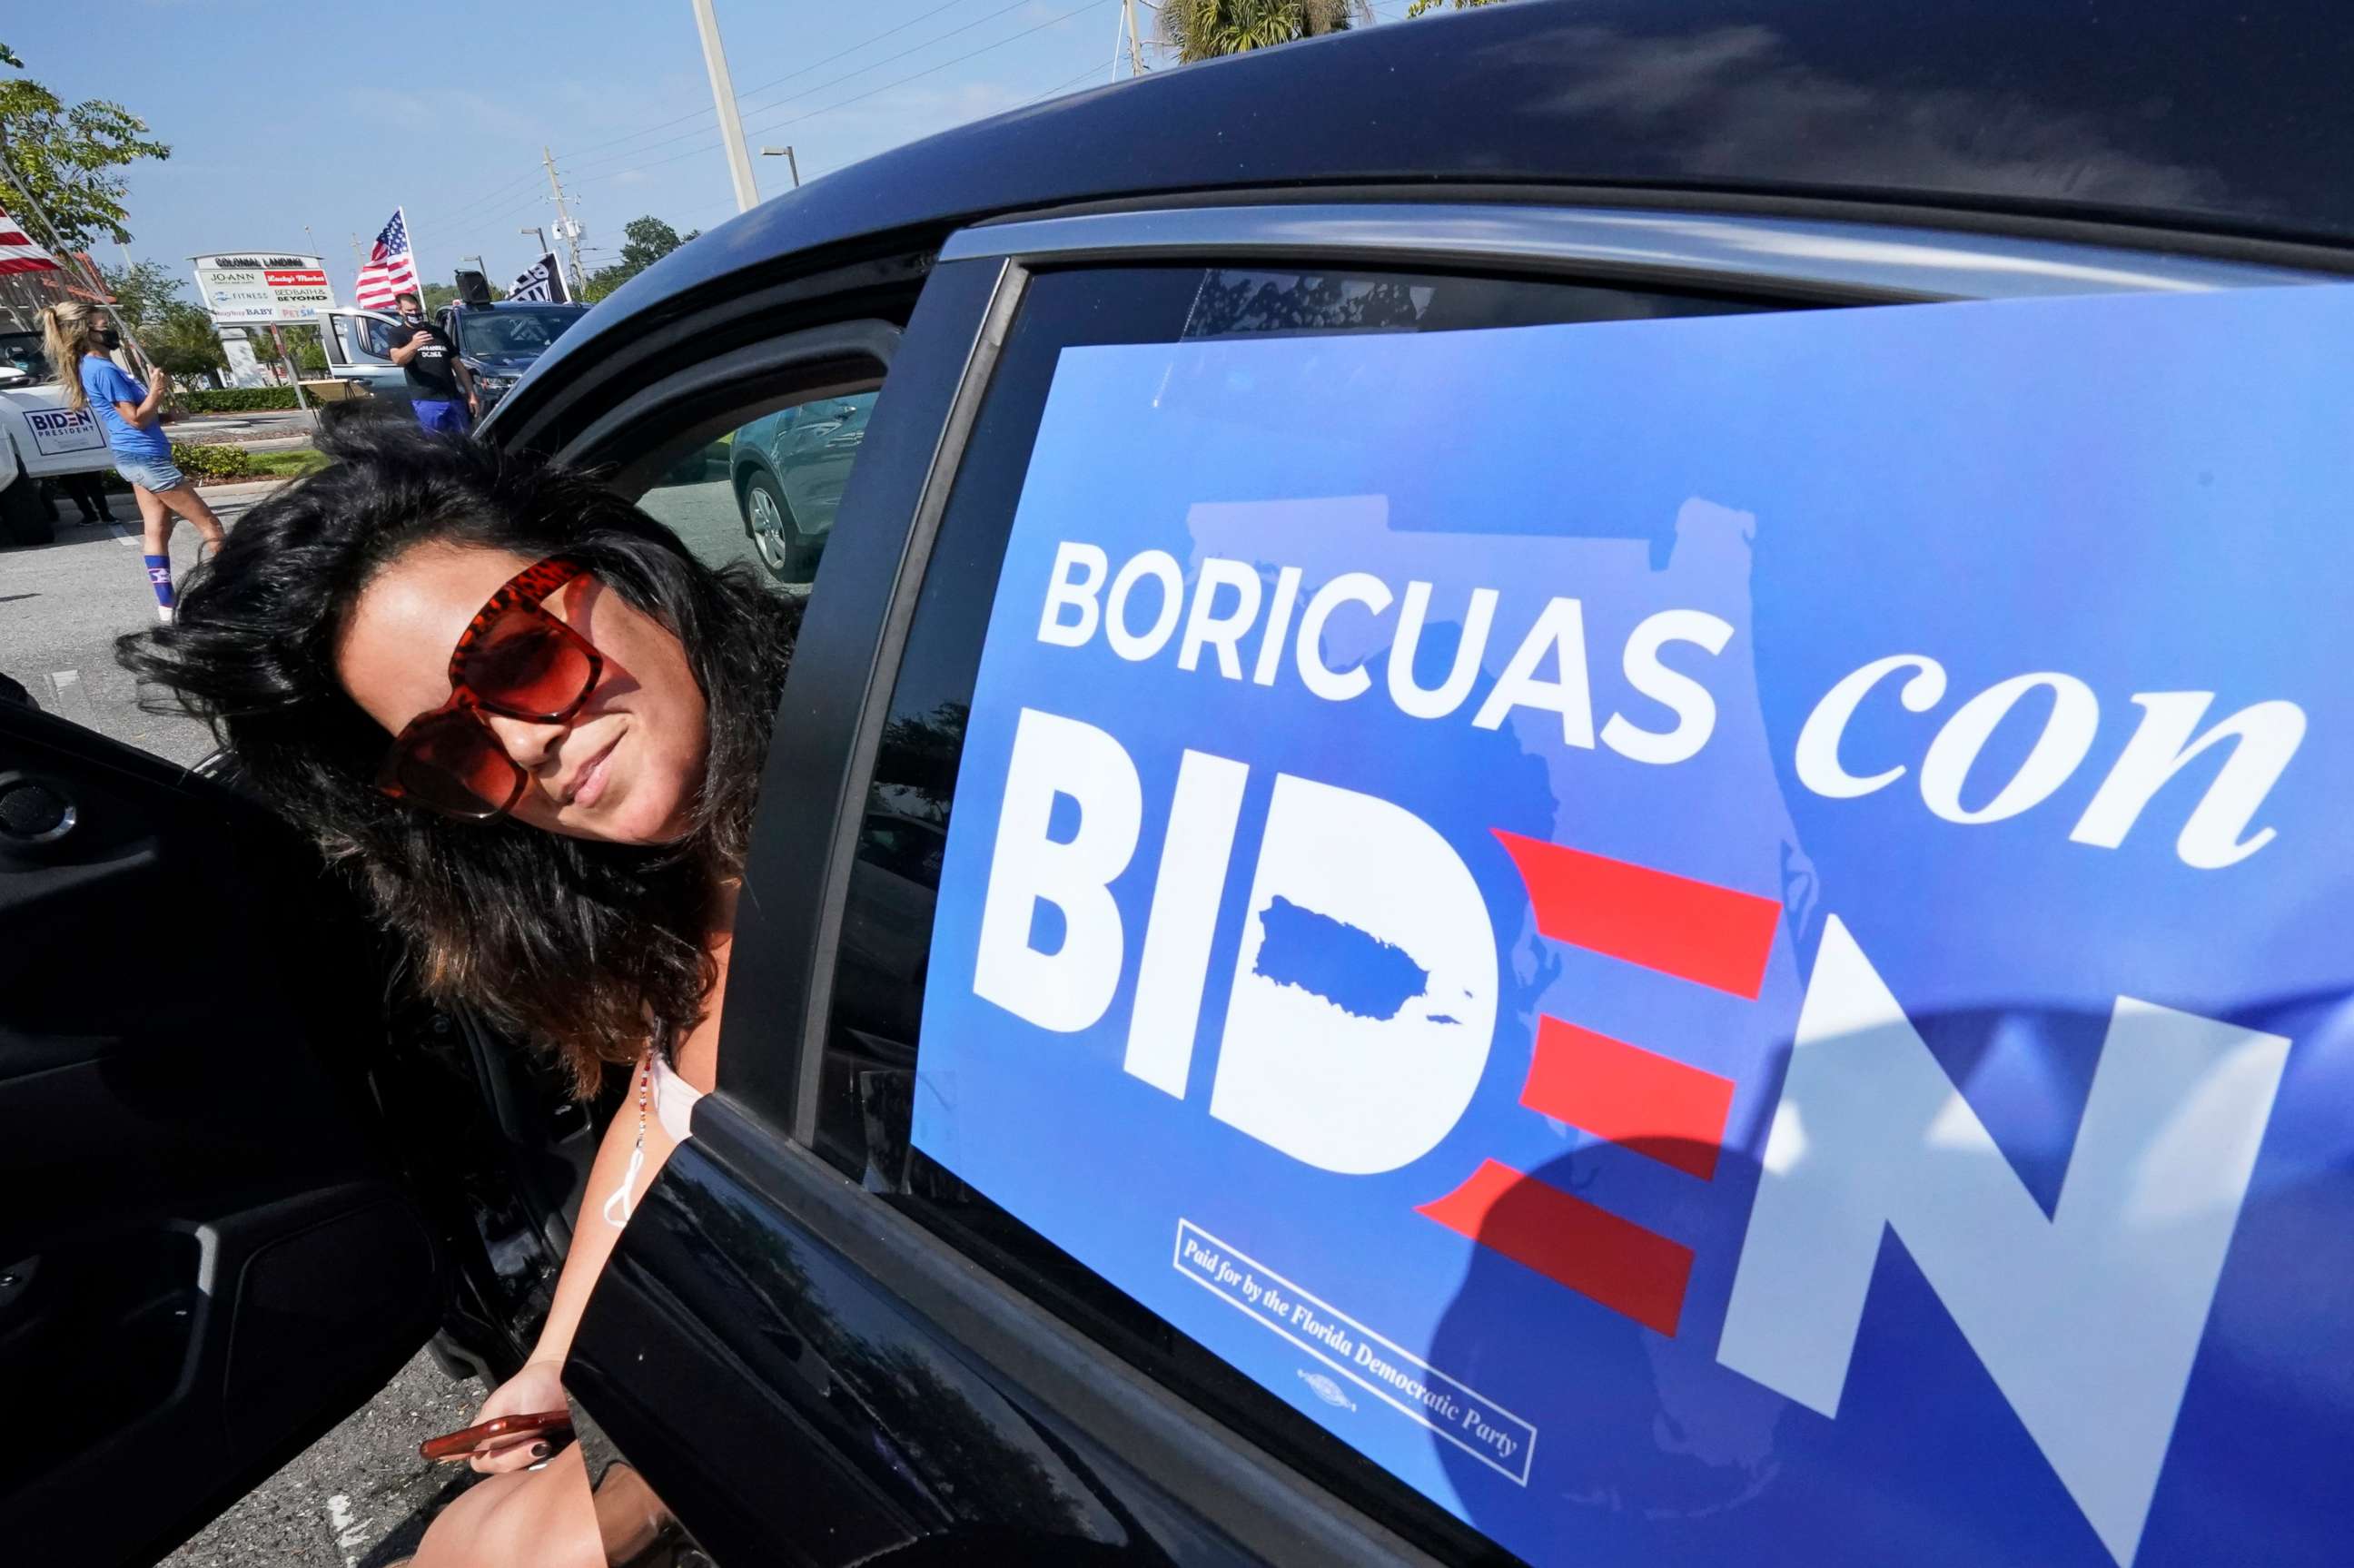 PHOTO: Puerto Rican voter Ileana Manon attends a rally in support of Democratic presidential candidate and former Vice President Joe Biden, Oct. 17, 2020, in Orlando, Fla.